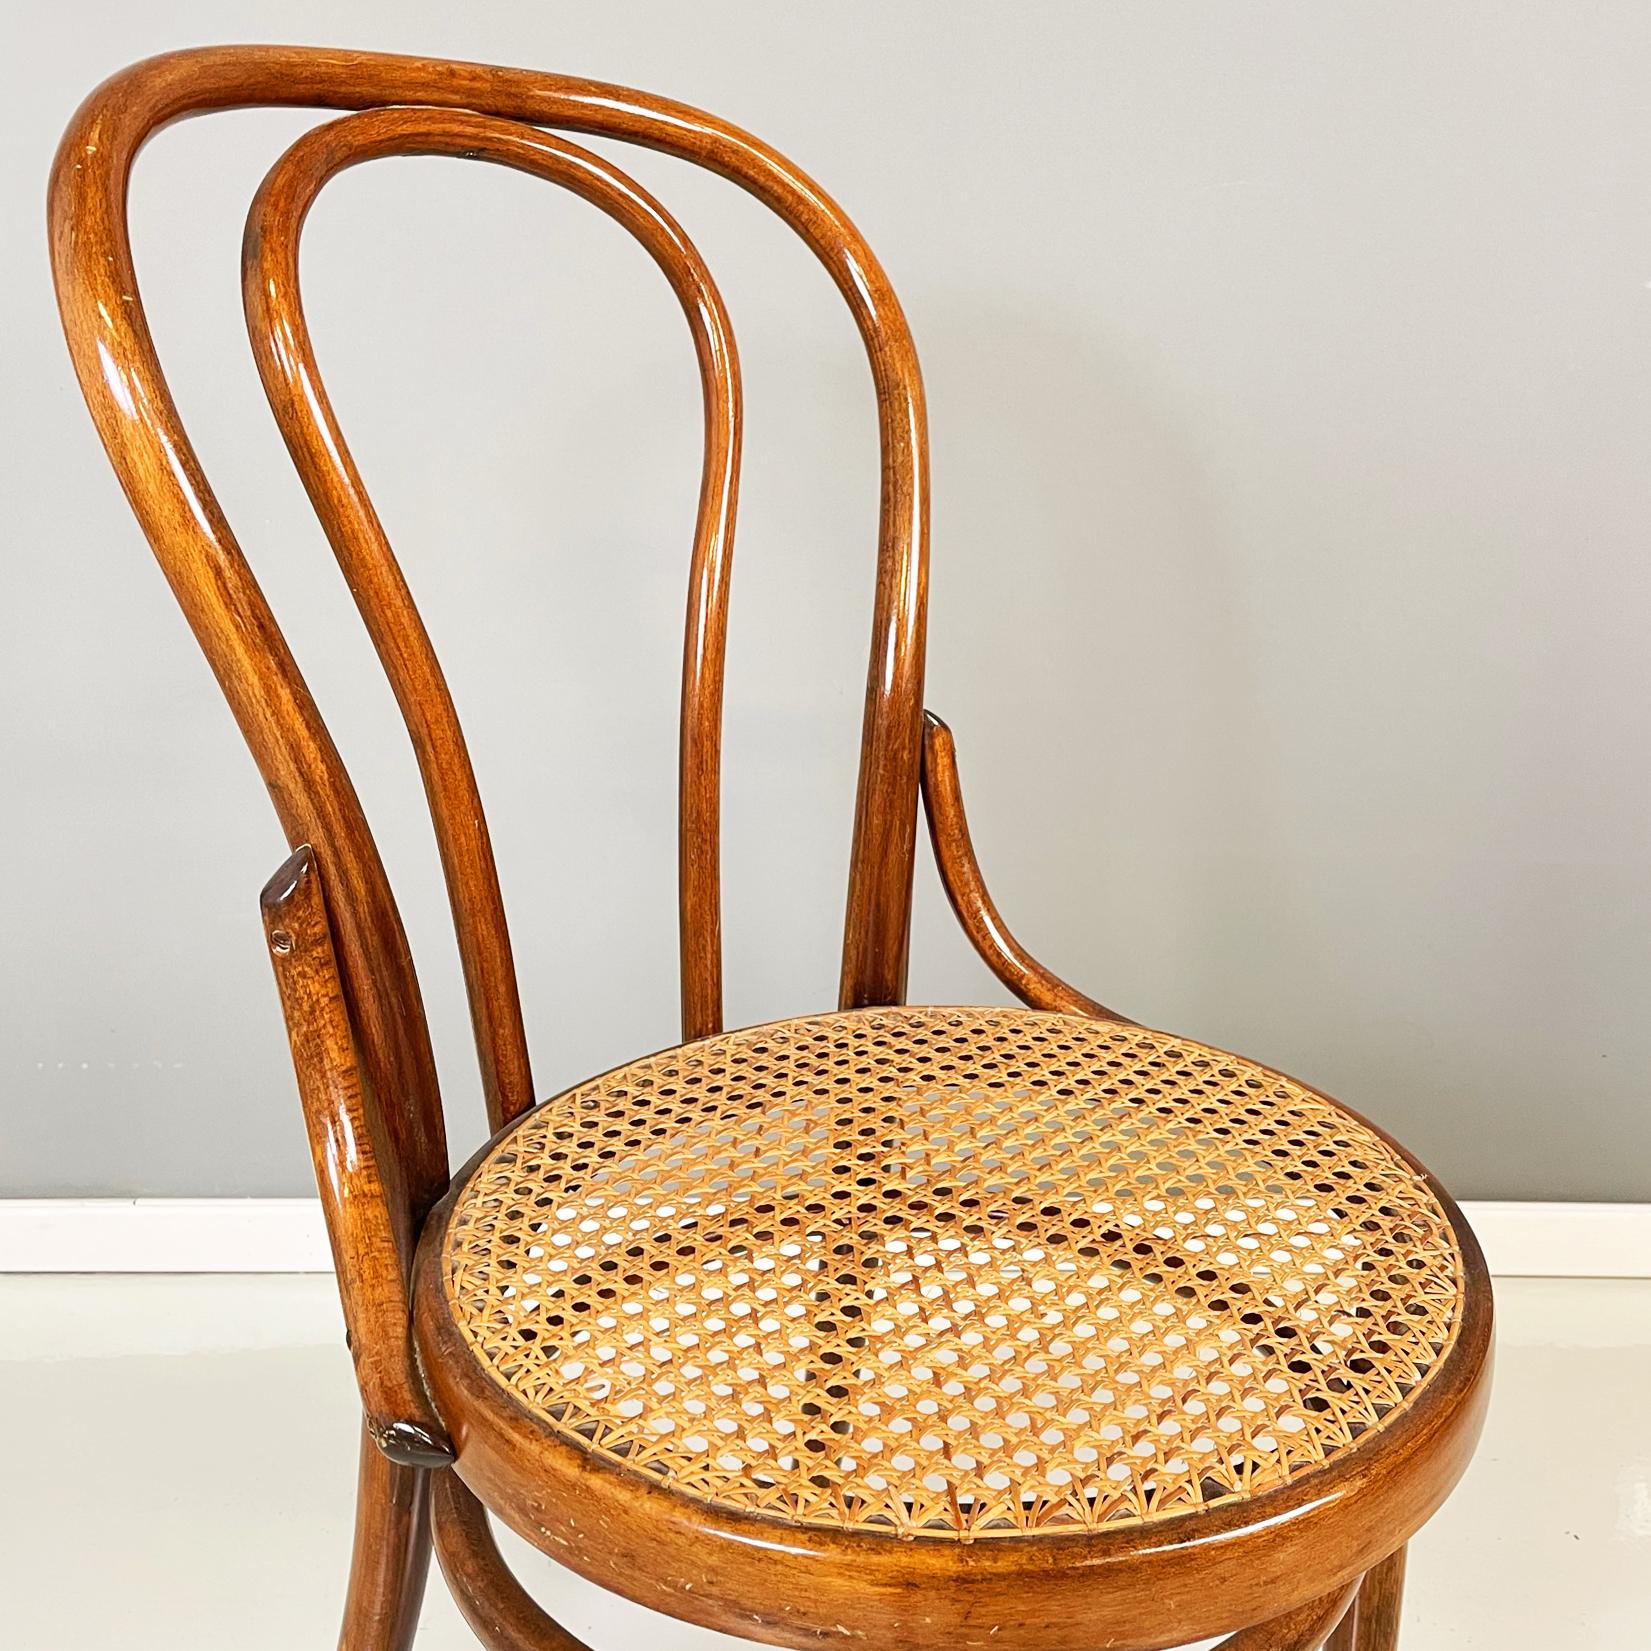 Austrian Chairs Thonet style with Straw and Wood by Salvatore Leone, 1900s For Sale 3